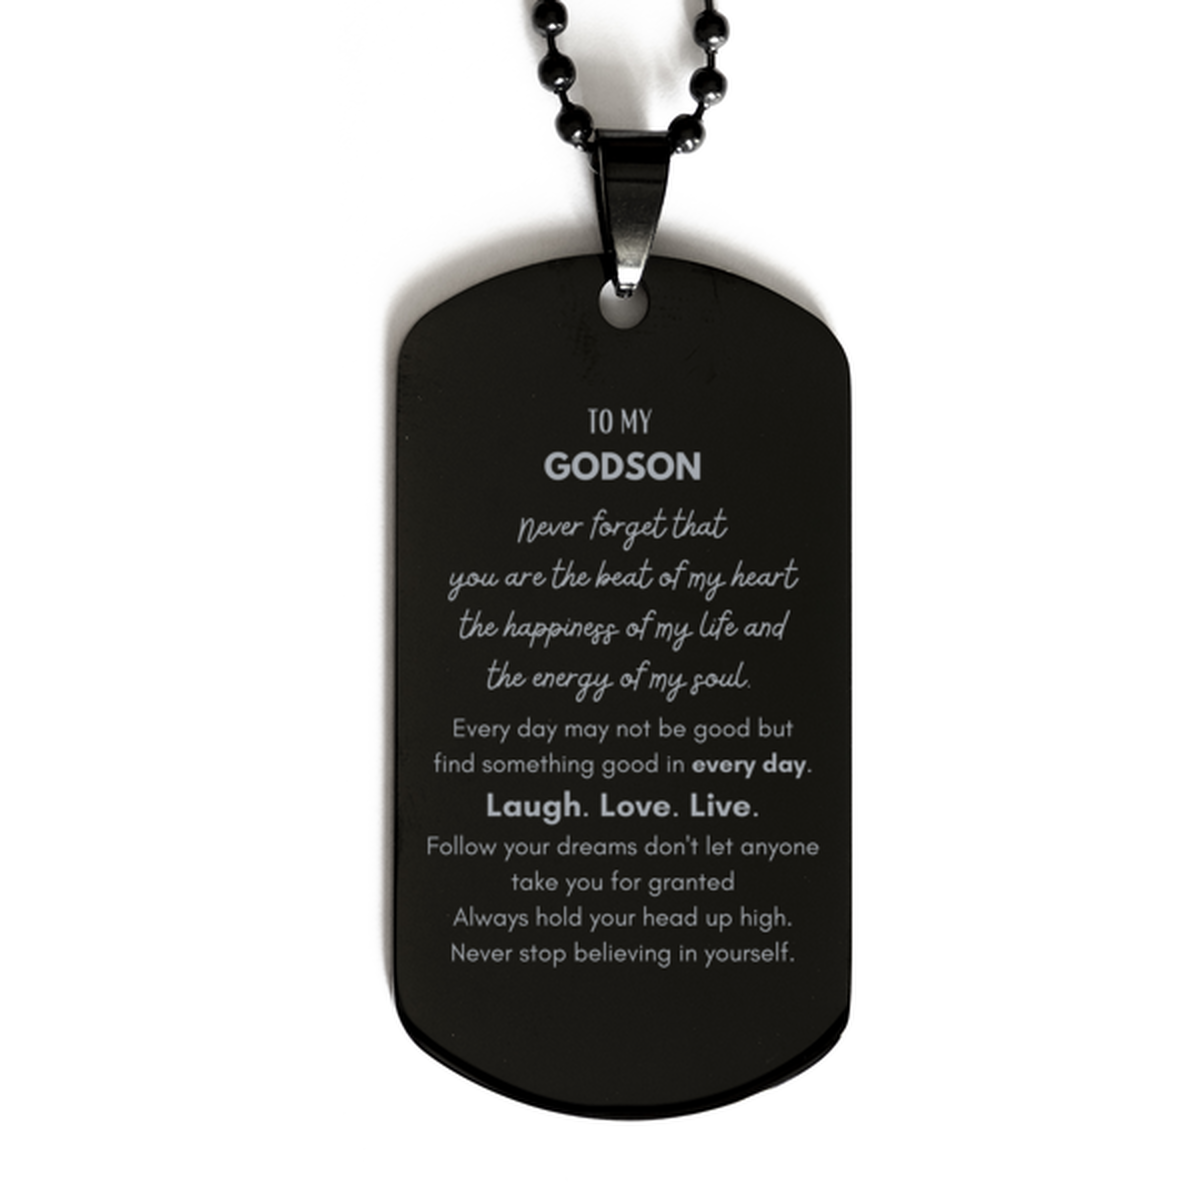 To My Godson Dogtag Gifts, Christmas Godson Black Dog Tag Present, Birthday Unique Motivational For Godson, To My Godson Never forget that you are the beat of my heart the happiness of my life and the energy of my soul